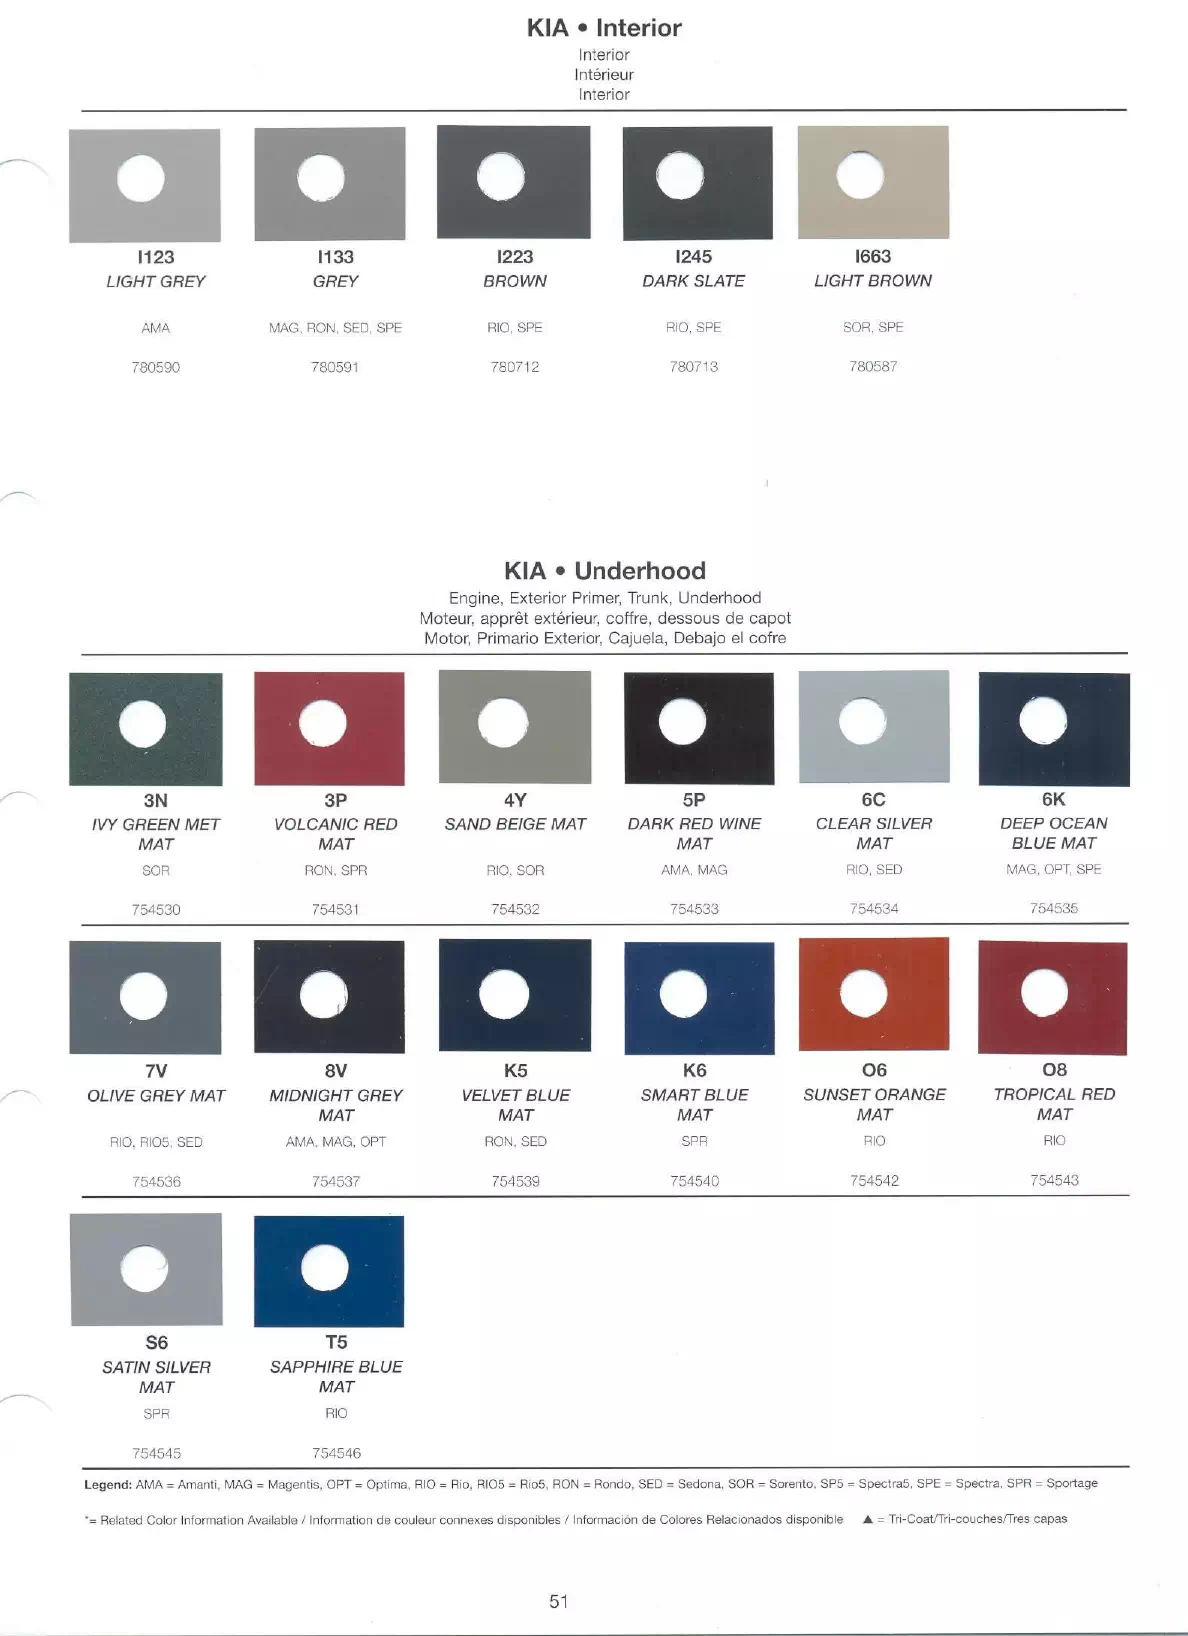 paint swatches and or codes for the 2008 kia's